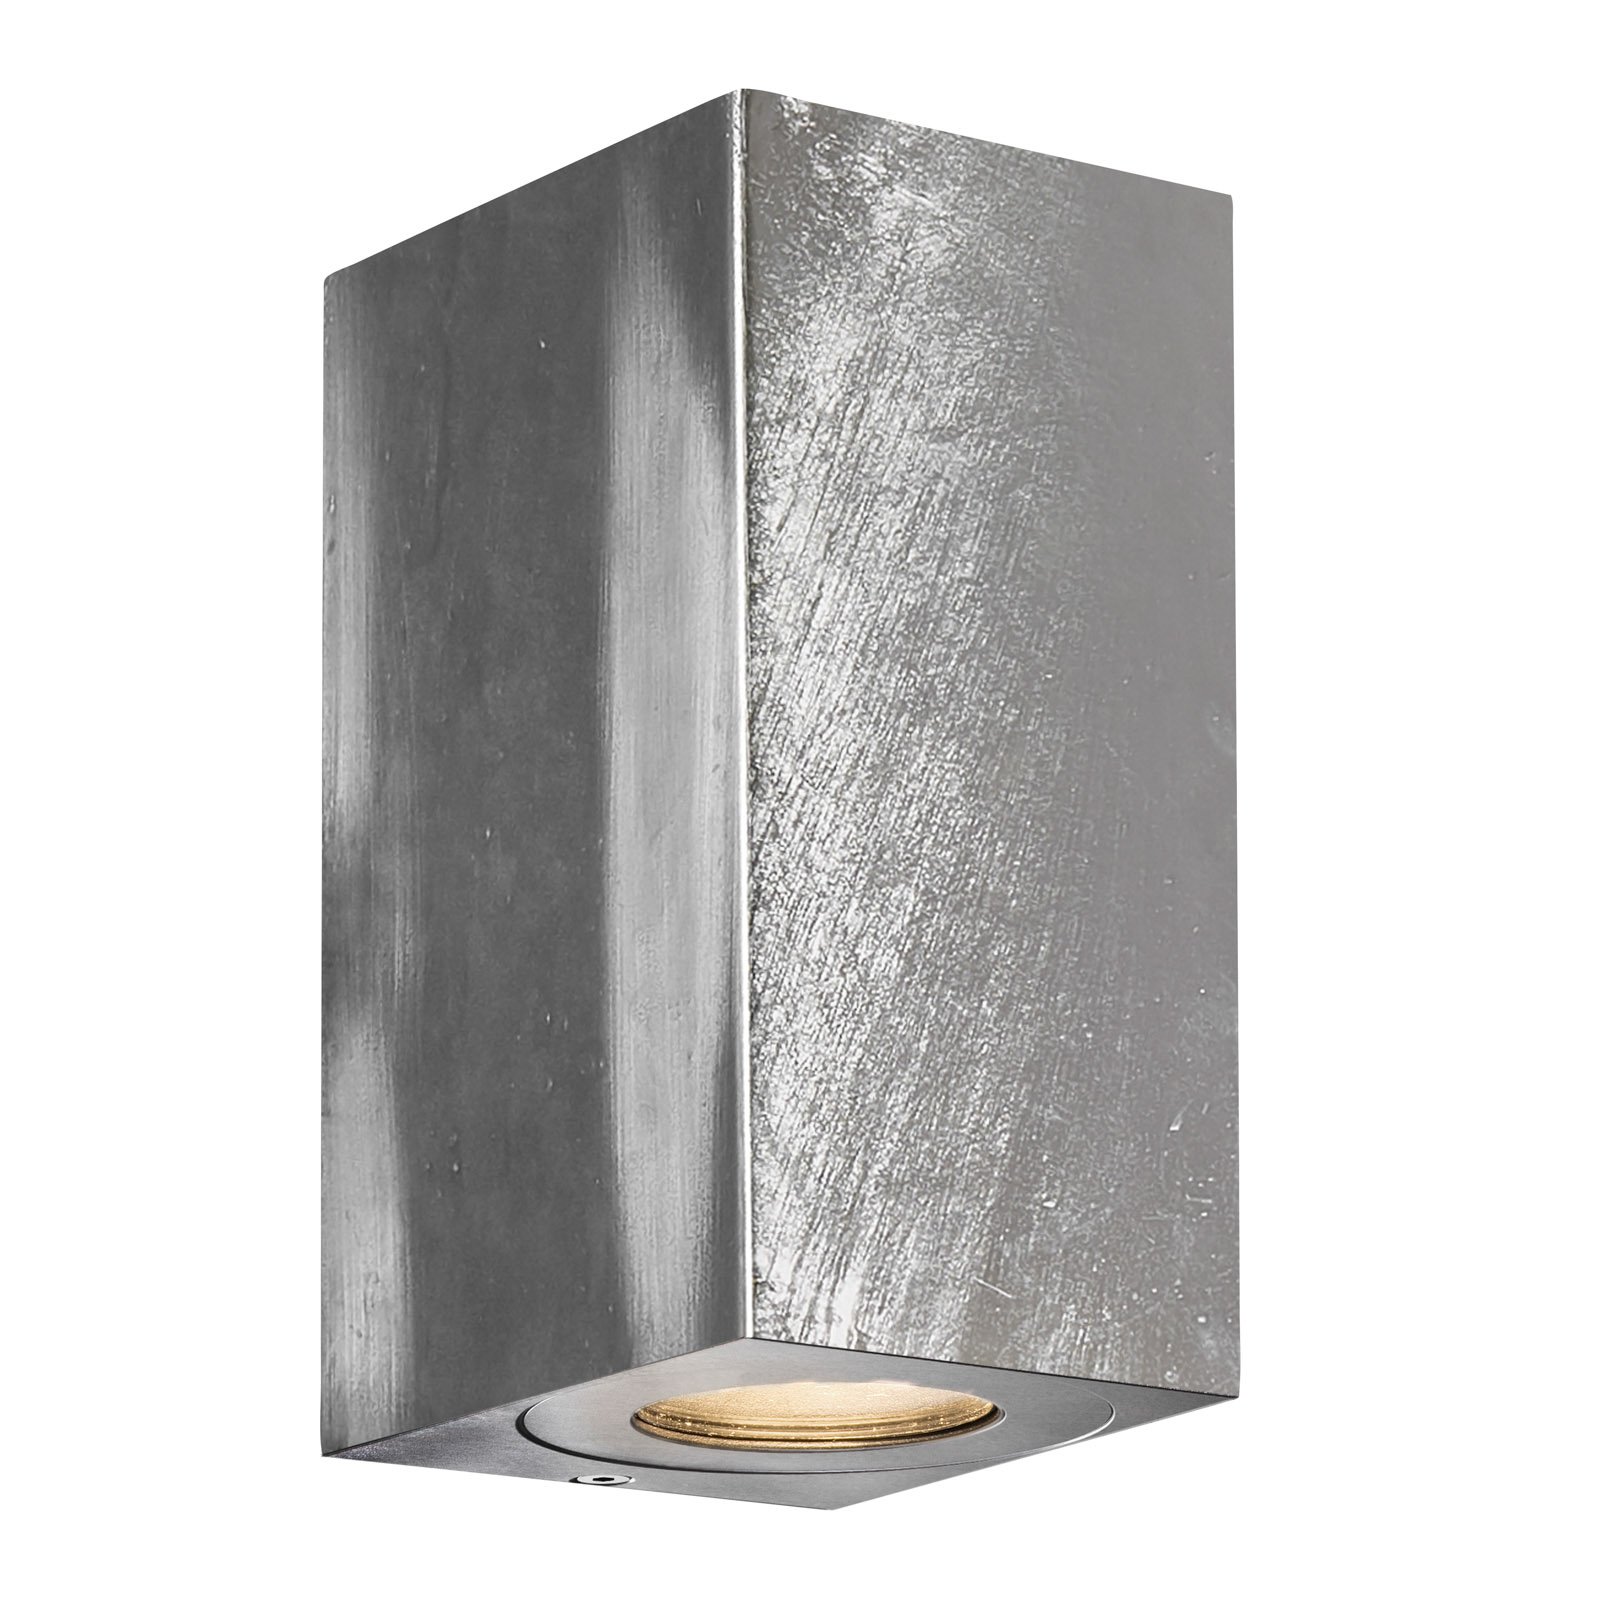 Canto Maxi Kubi 2 17cm galvanised outdoor wall lamp